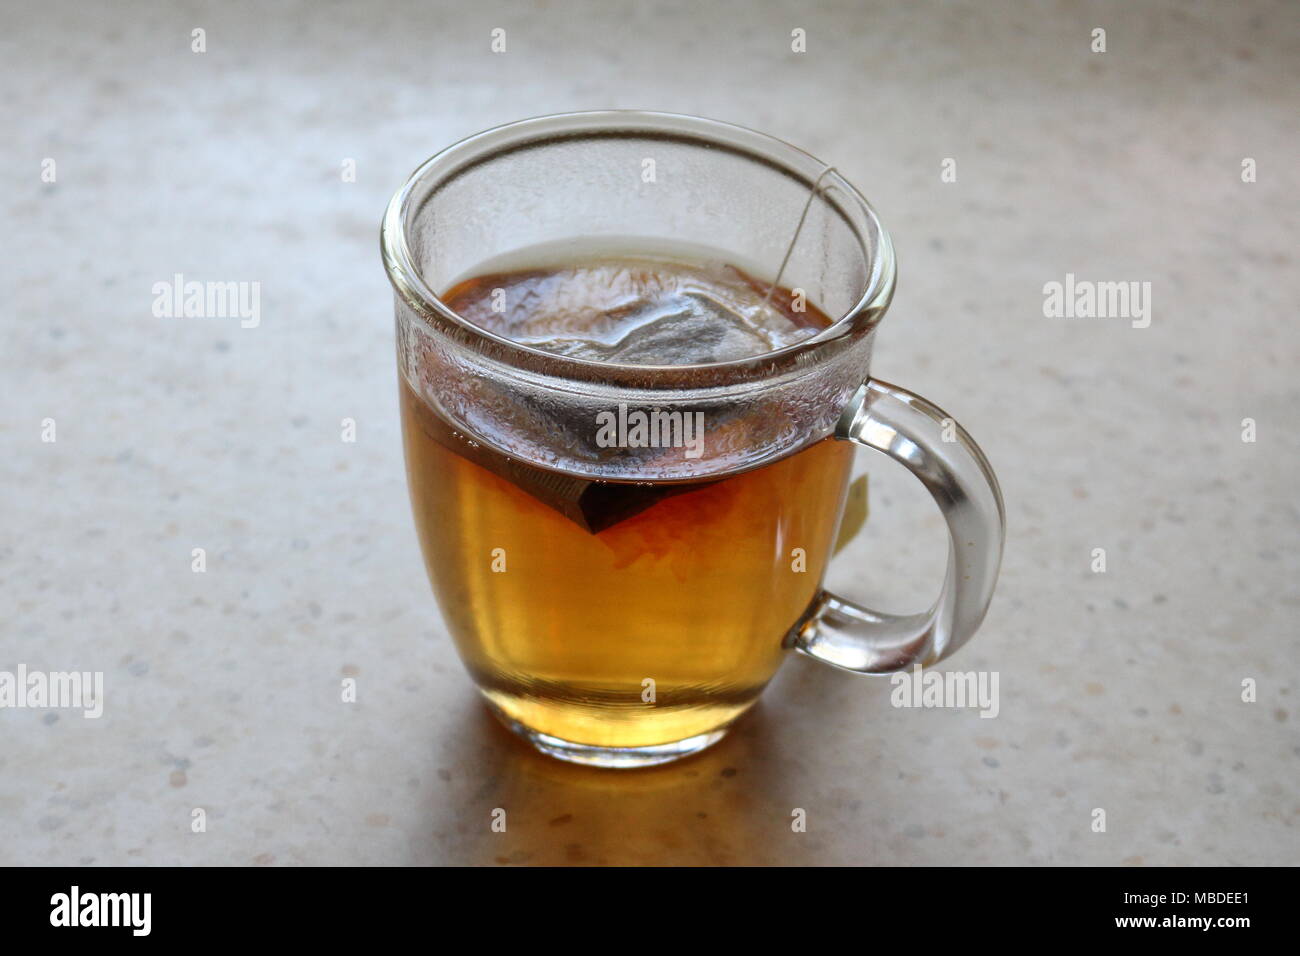 Teabag in a glass cup of hot water Stock Photo